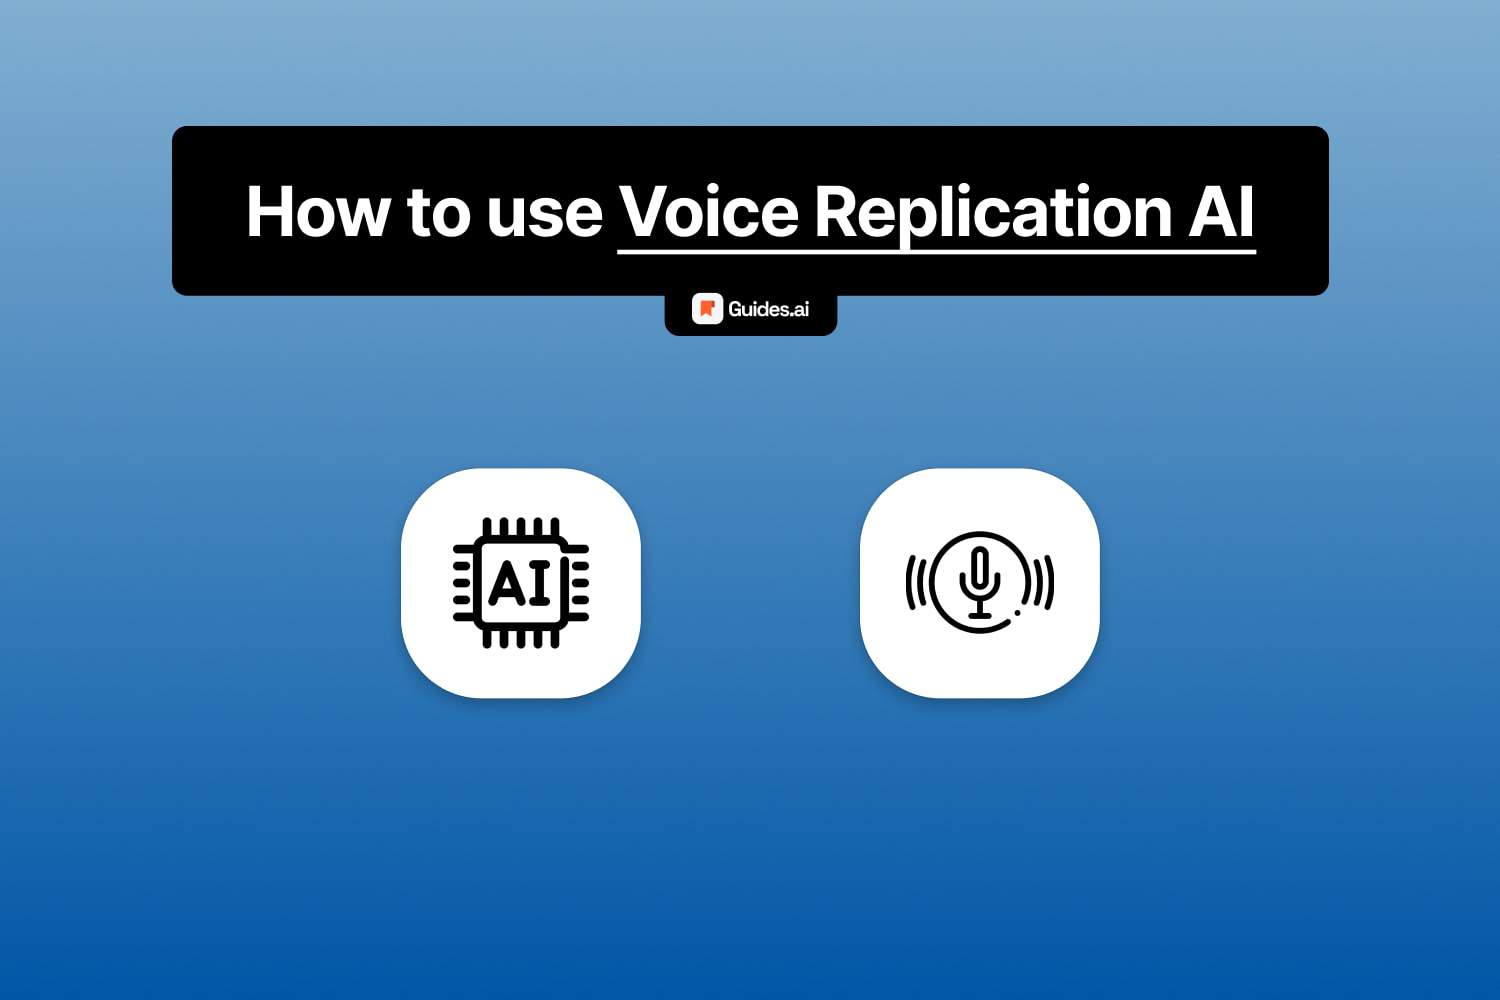 How to use Voice Replication AI